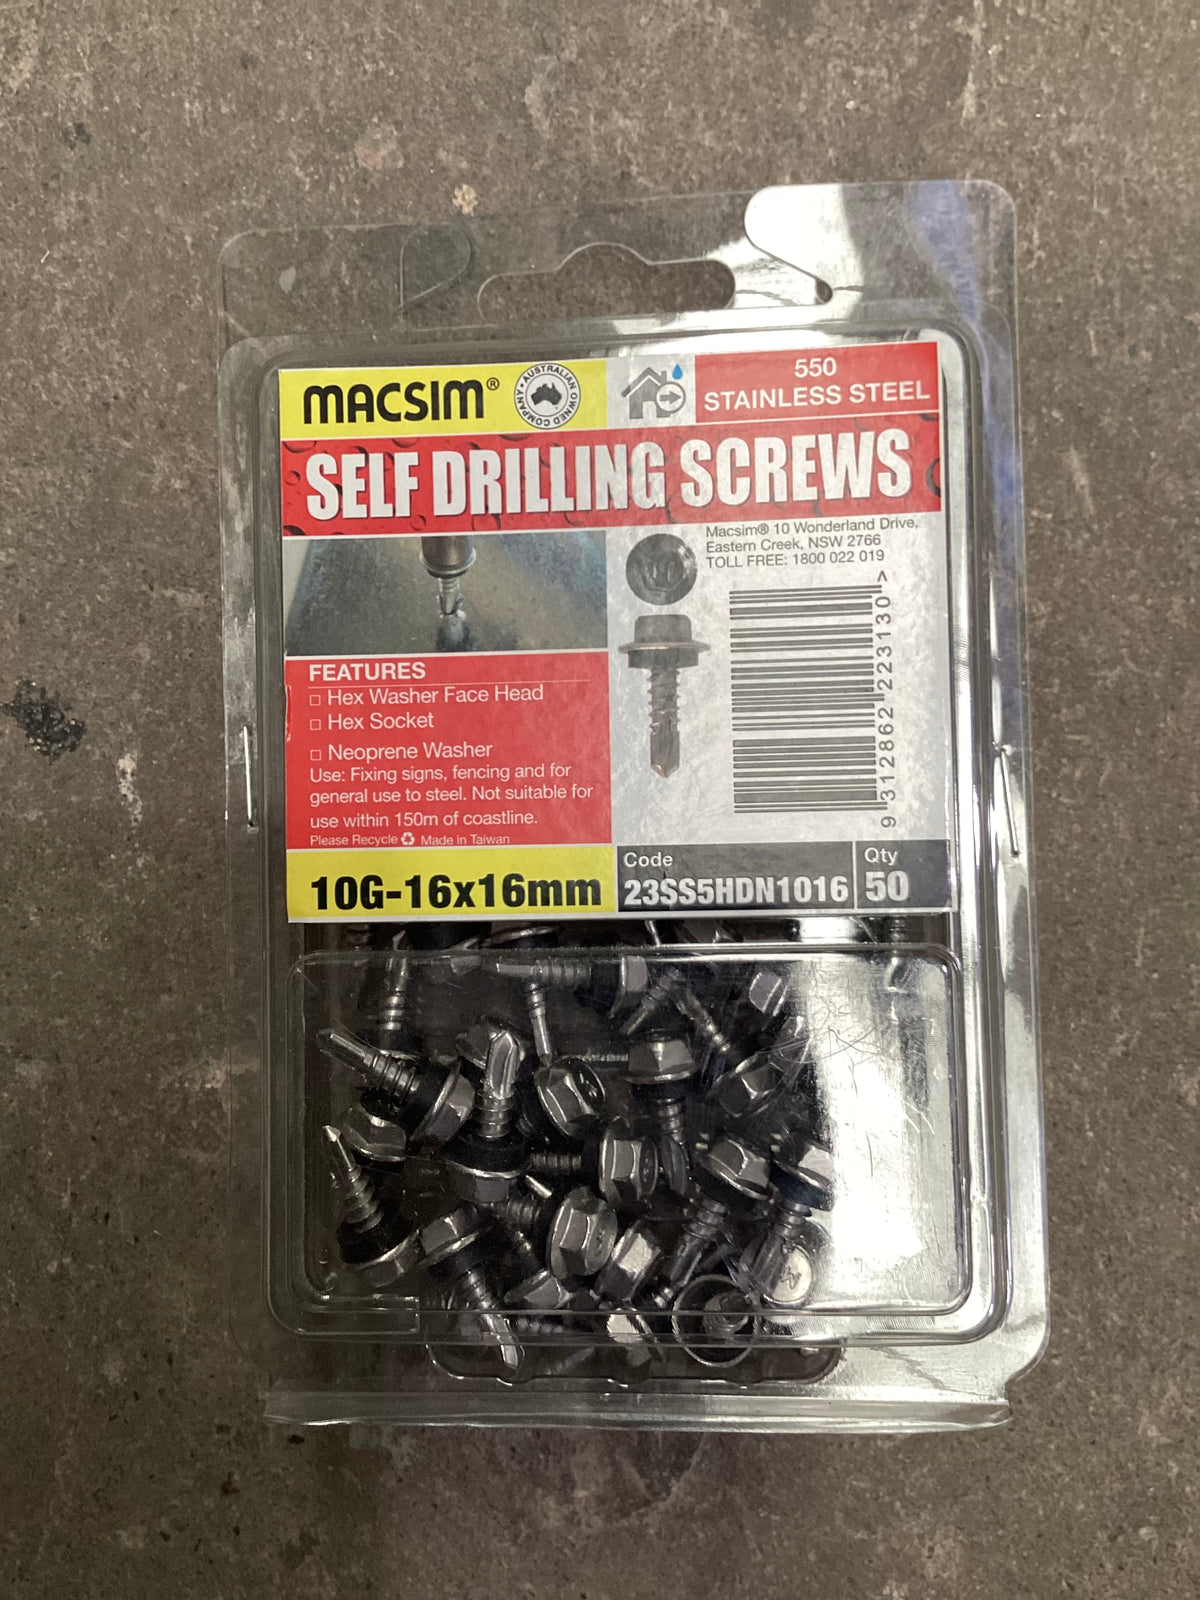 10G-16x16mm Self Drilling Screws - stainless hex washer face head